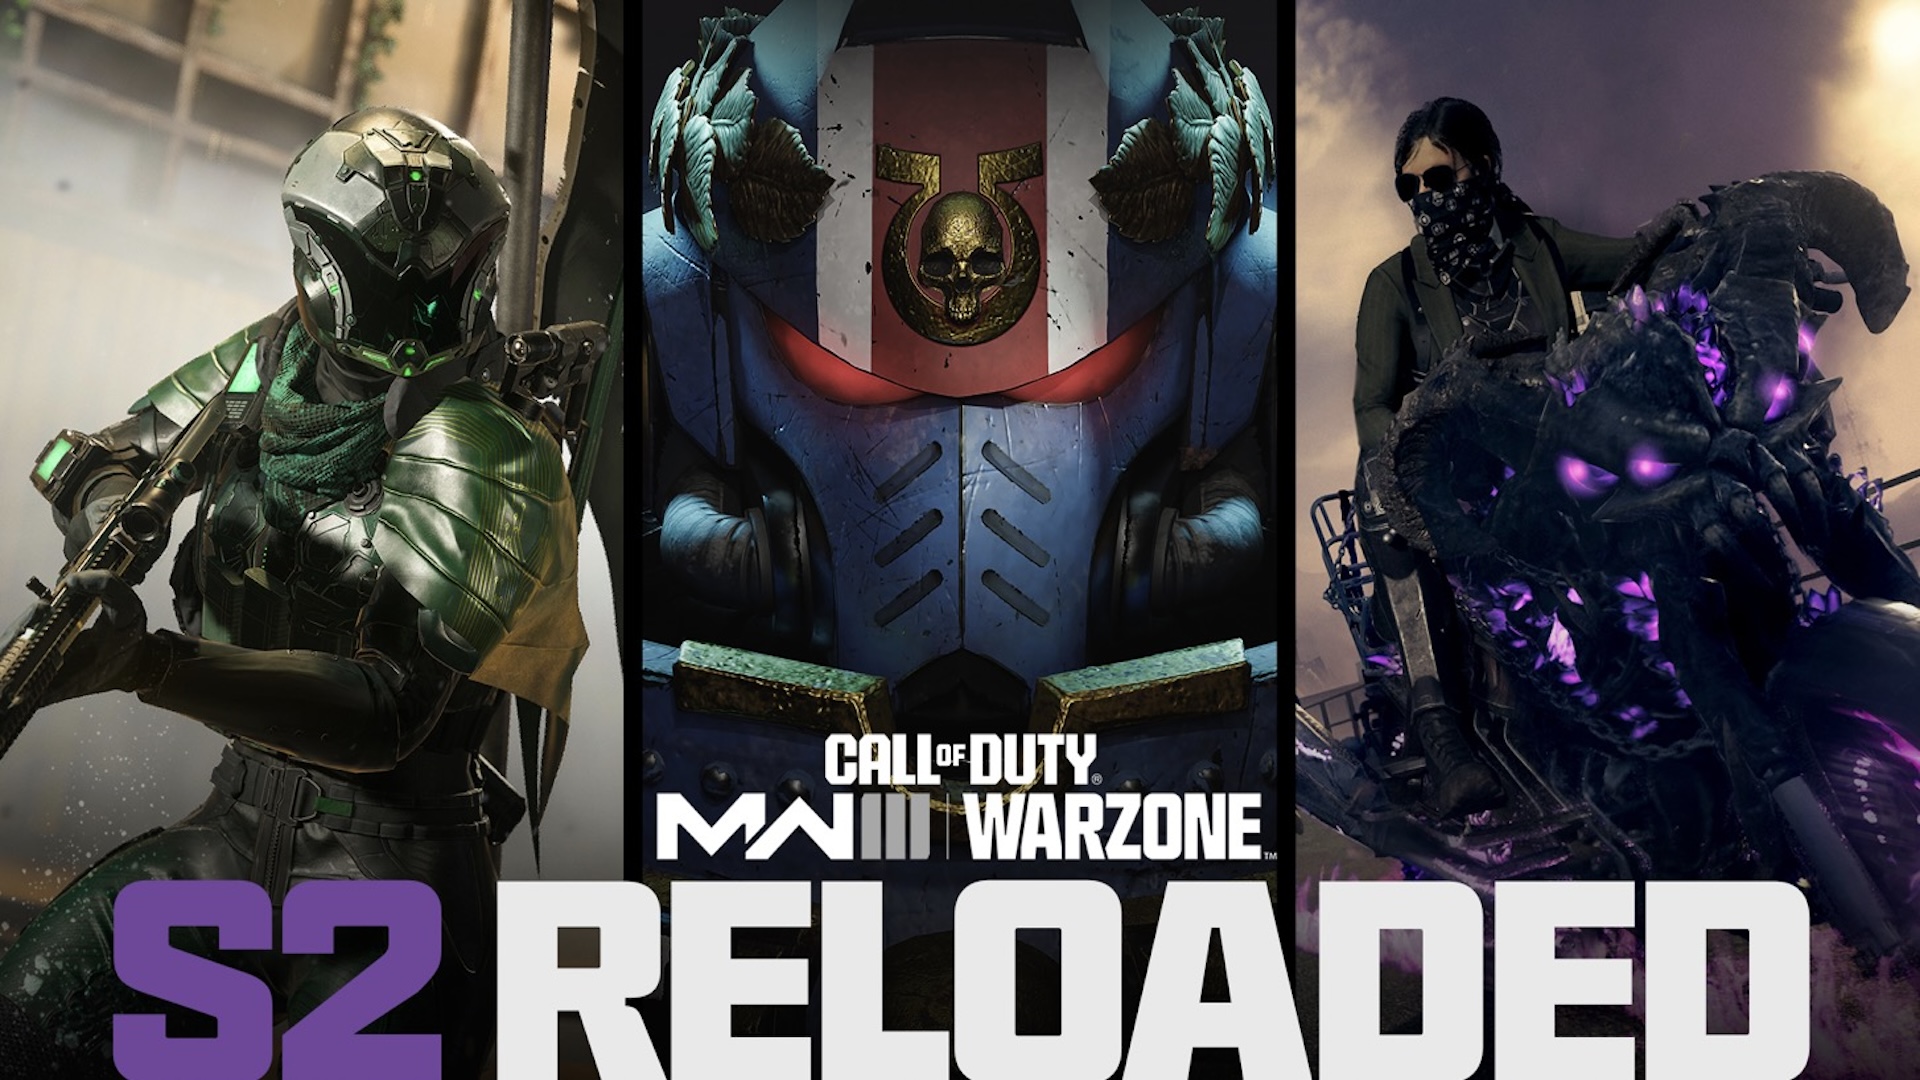 Promotional image for Modern Warfare 3 Season 2 Reloaded. Showing Warhammer 40K character next to Call of Duty Operators